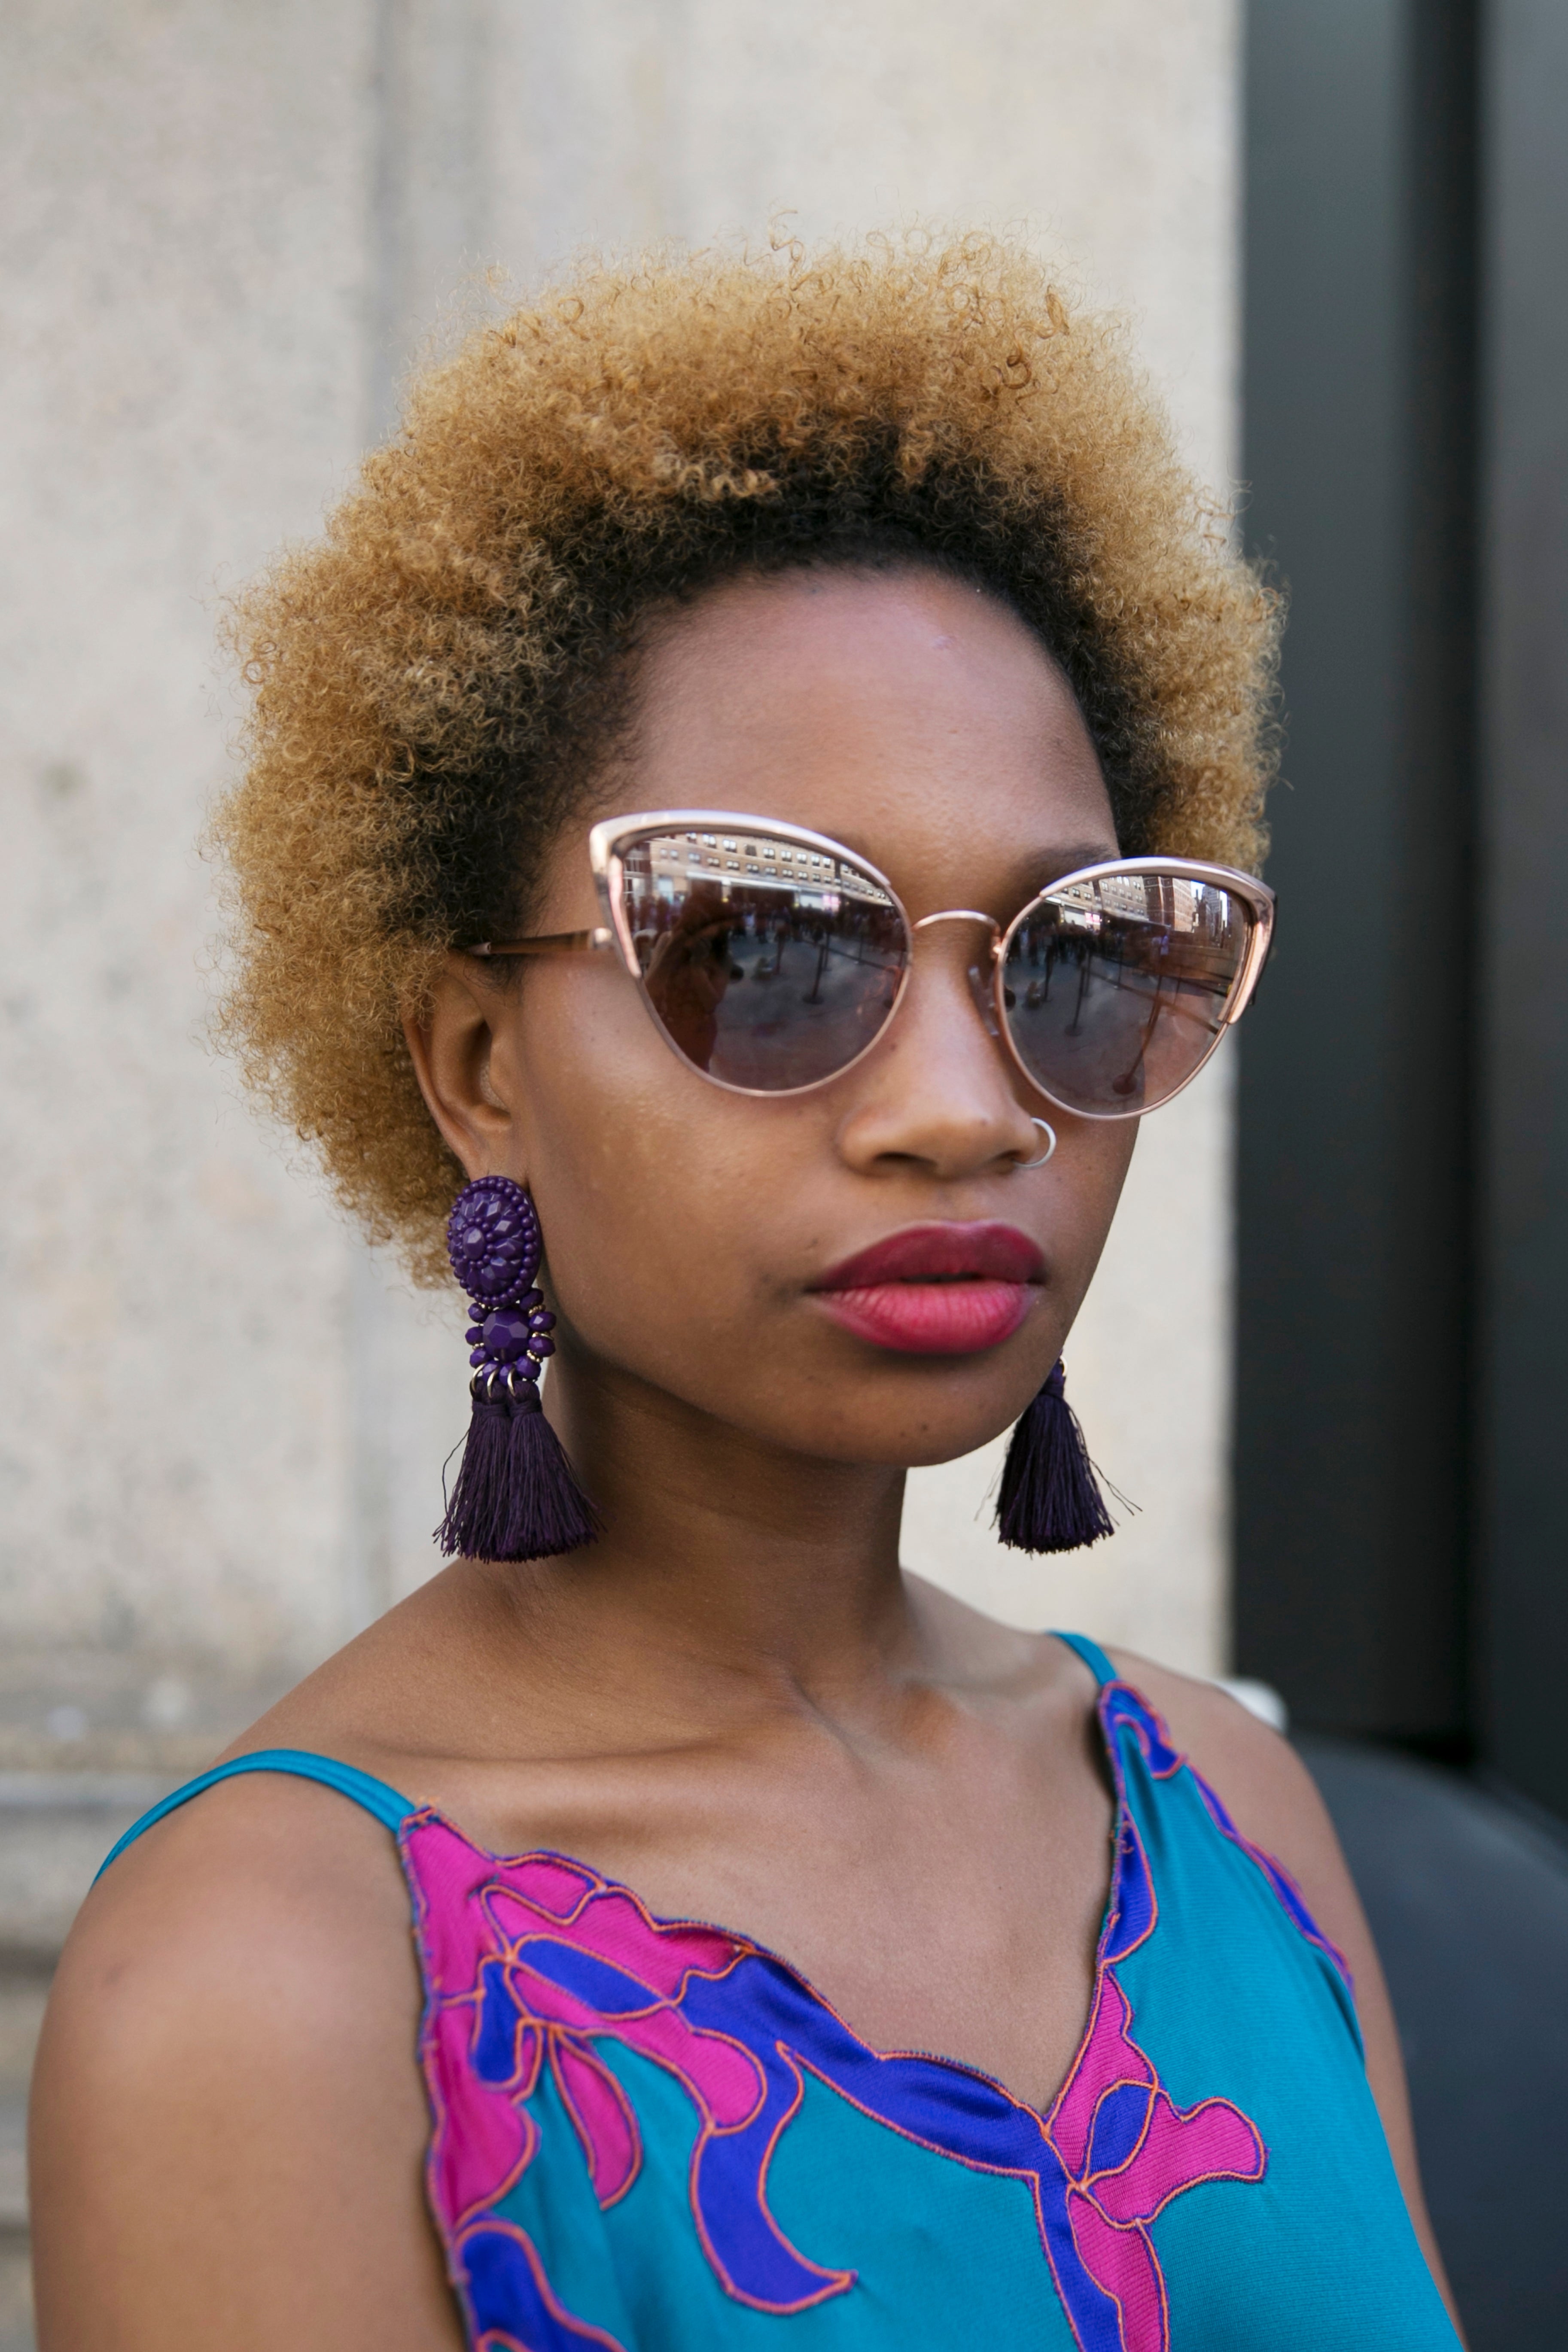 NYFW Hair and Beauty Looks From Street Style Queens
